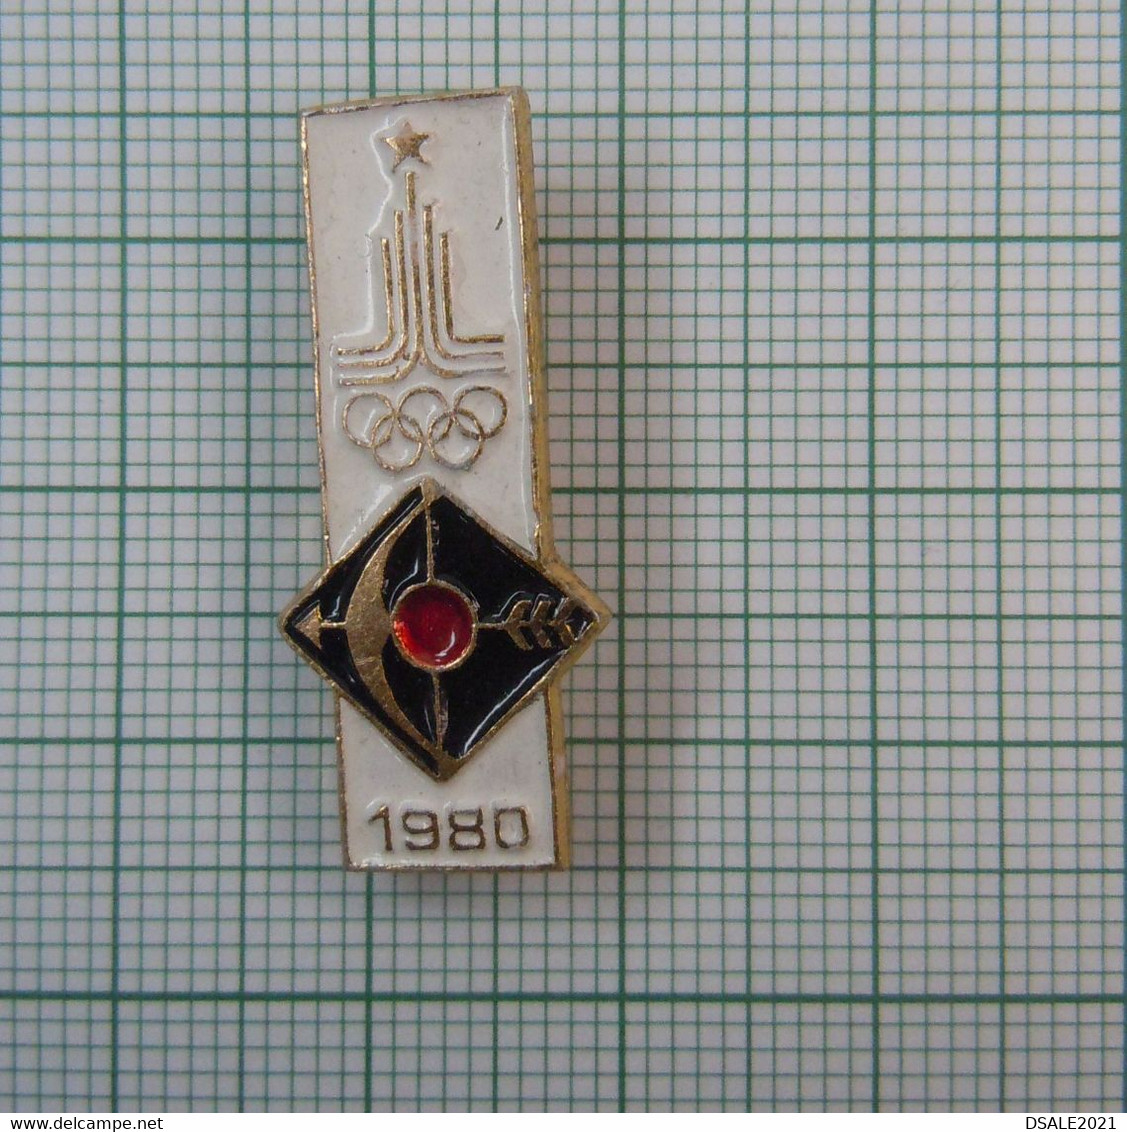 Russia USSR Russland Sowjetunion Moscow 1980 Summer Olympic Archery Sport Mascot Vintage Pin Badge (m984) - Bogenschiessen